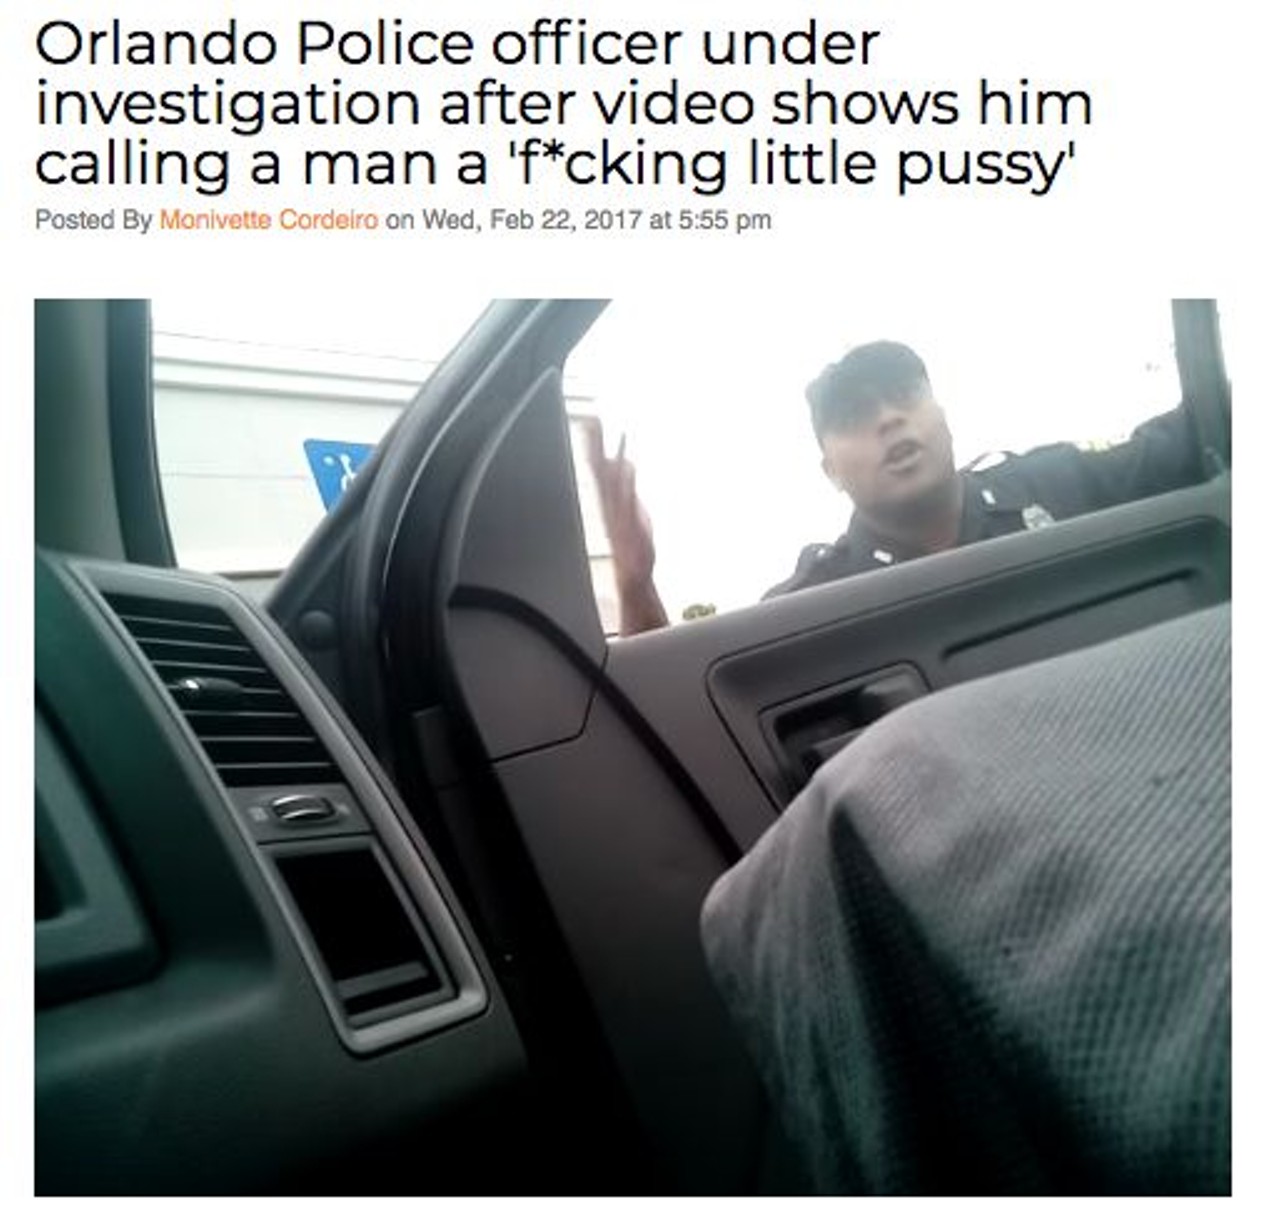 An Orlando Police officer was under an internal affairs investigation after a video surfaced showing him cursing and threatening another man.  Read more